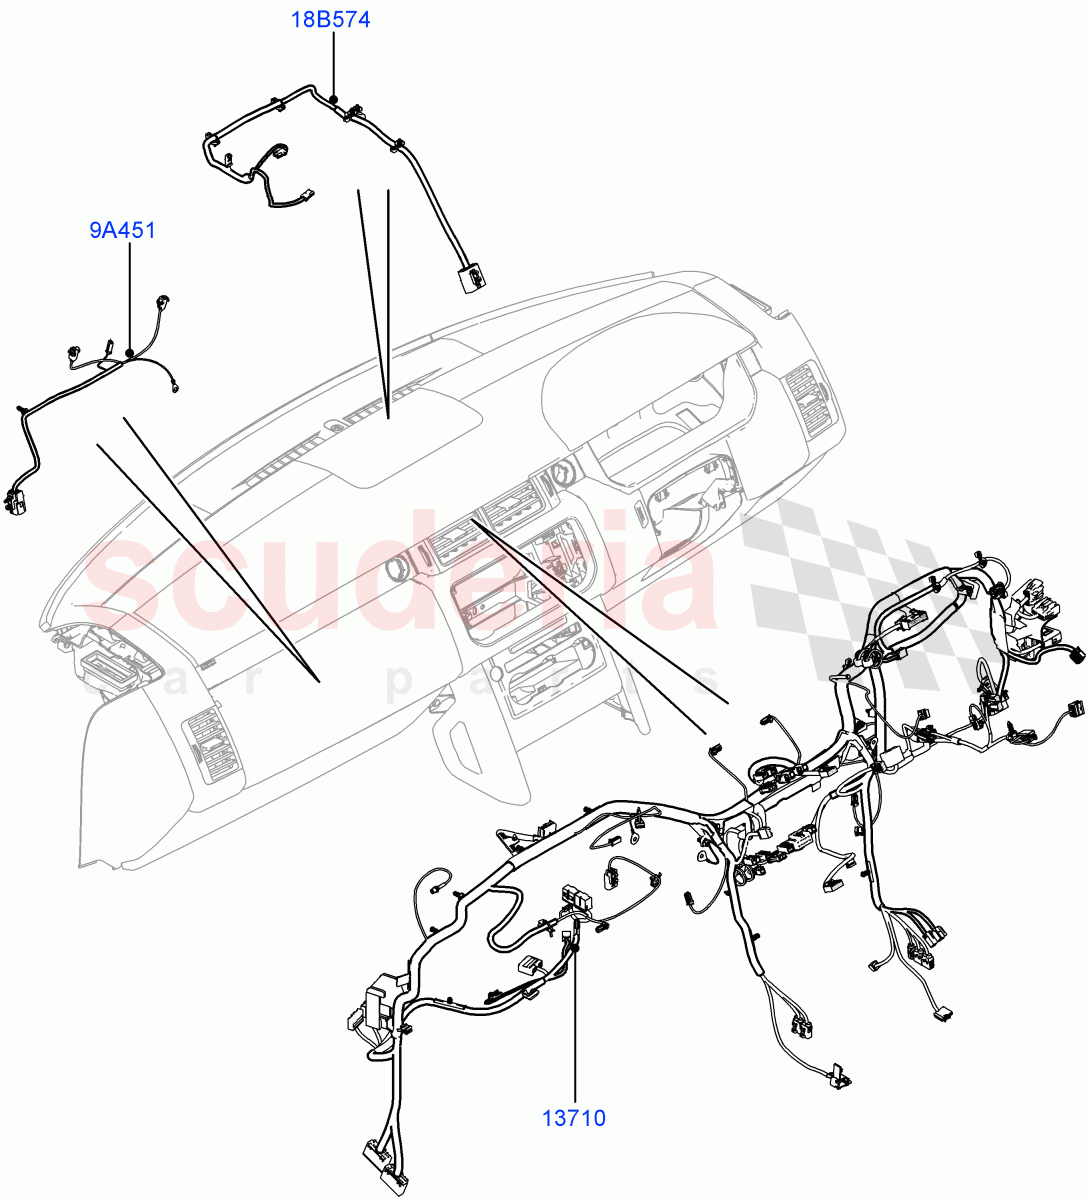 Electrical Wiring - Engine And Dash(Facia)(3.0 V6 Diesel Electric Hybrid Eng)((V)FROMFA000001,(V)TOFA999999) of Land Rover Land Rover Range Rover (2012-2021) [4.4 DOHC Diesel V8 DITC]